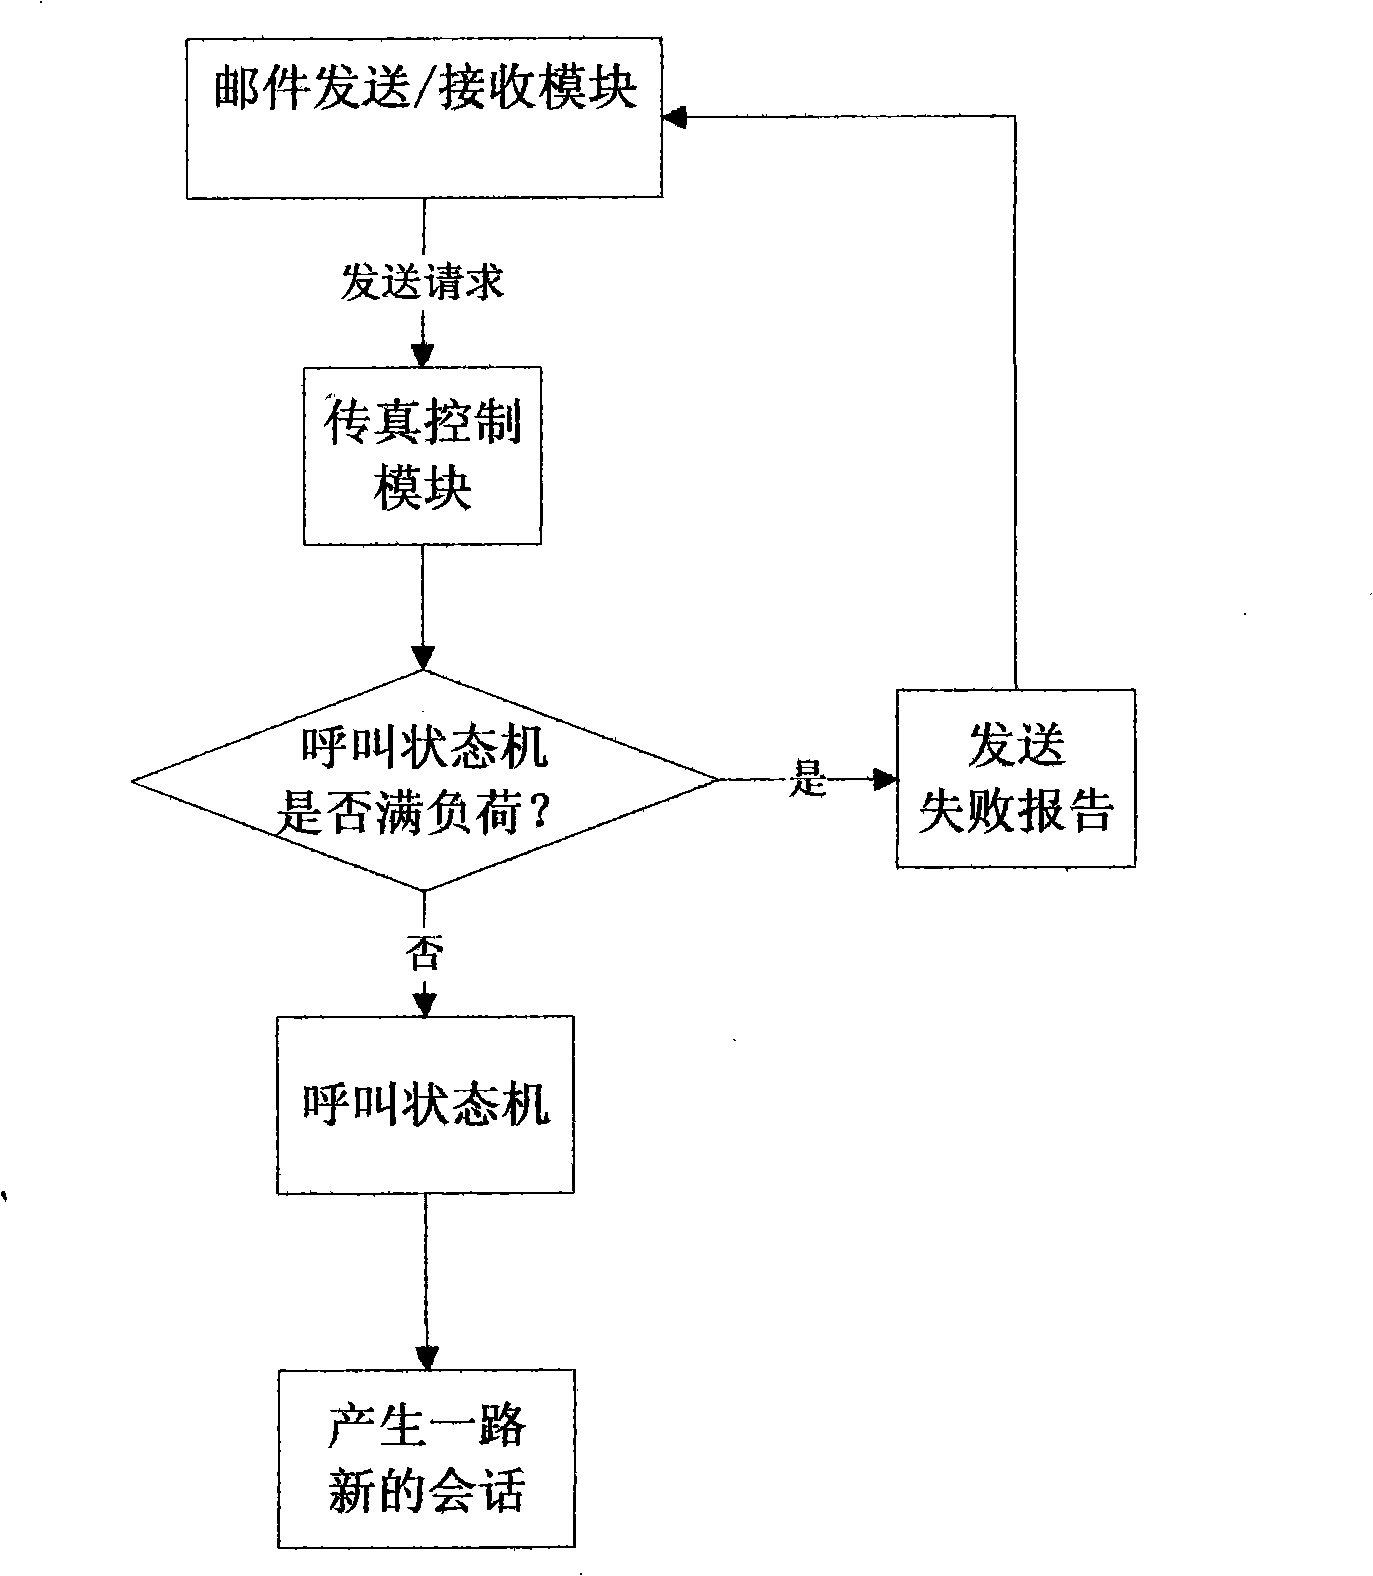 IP fax and its work method